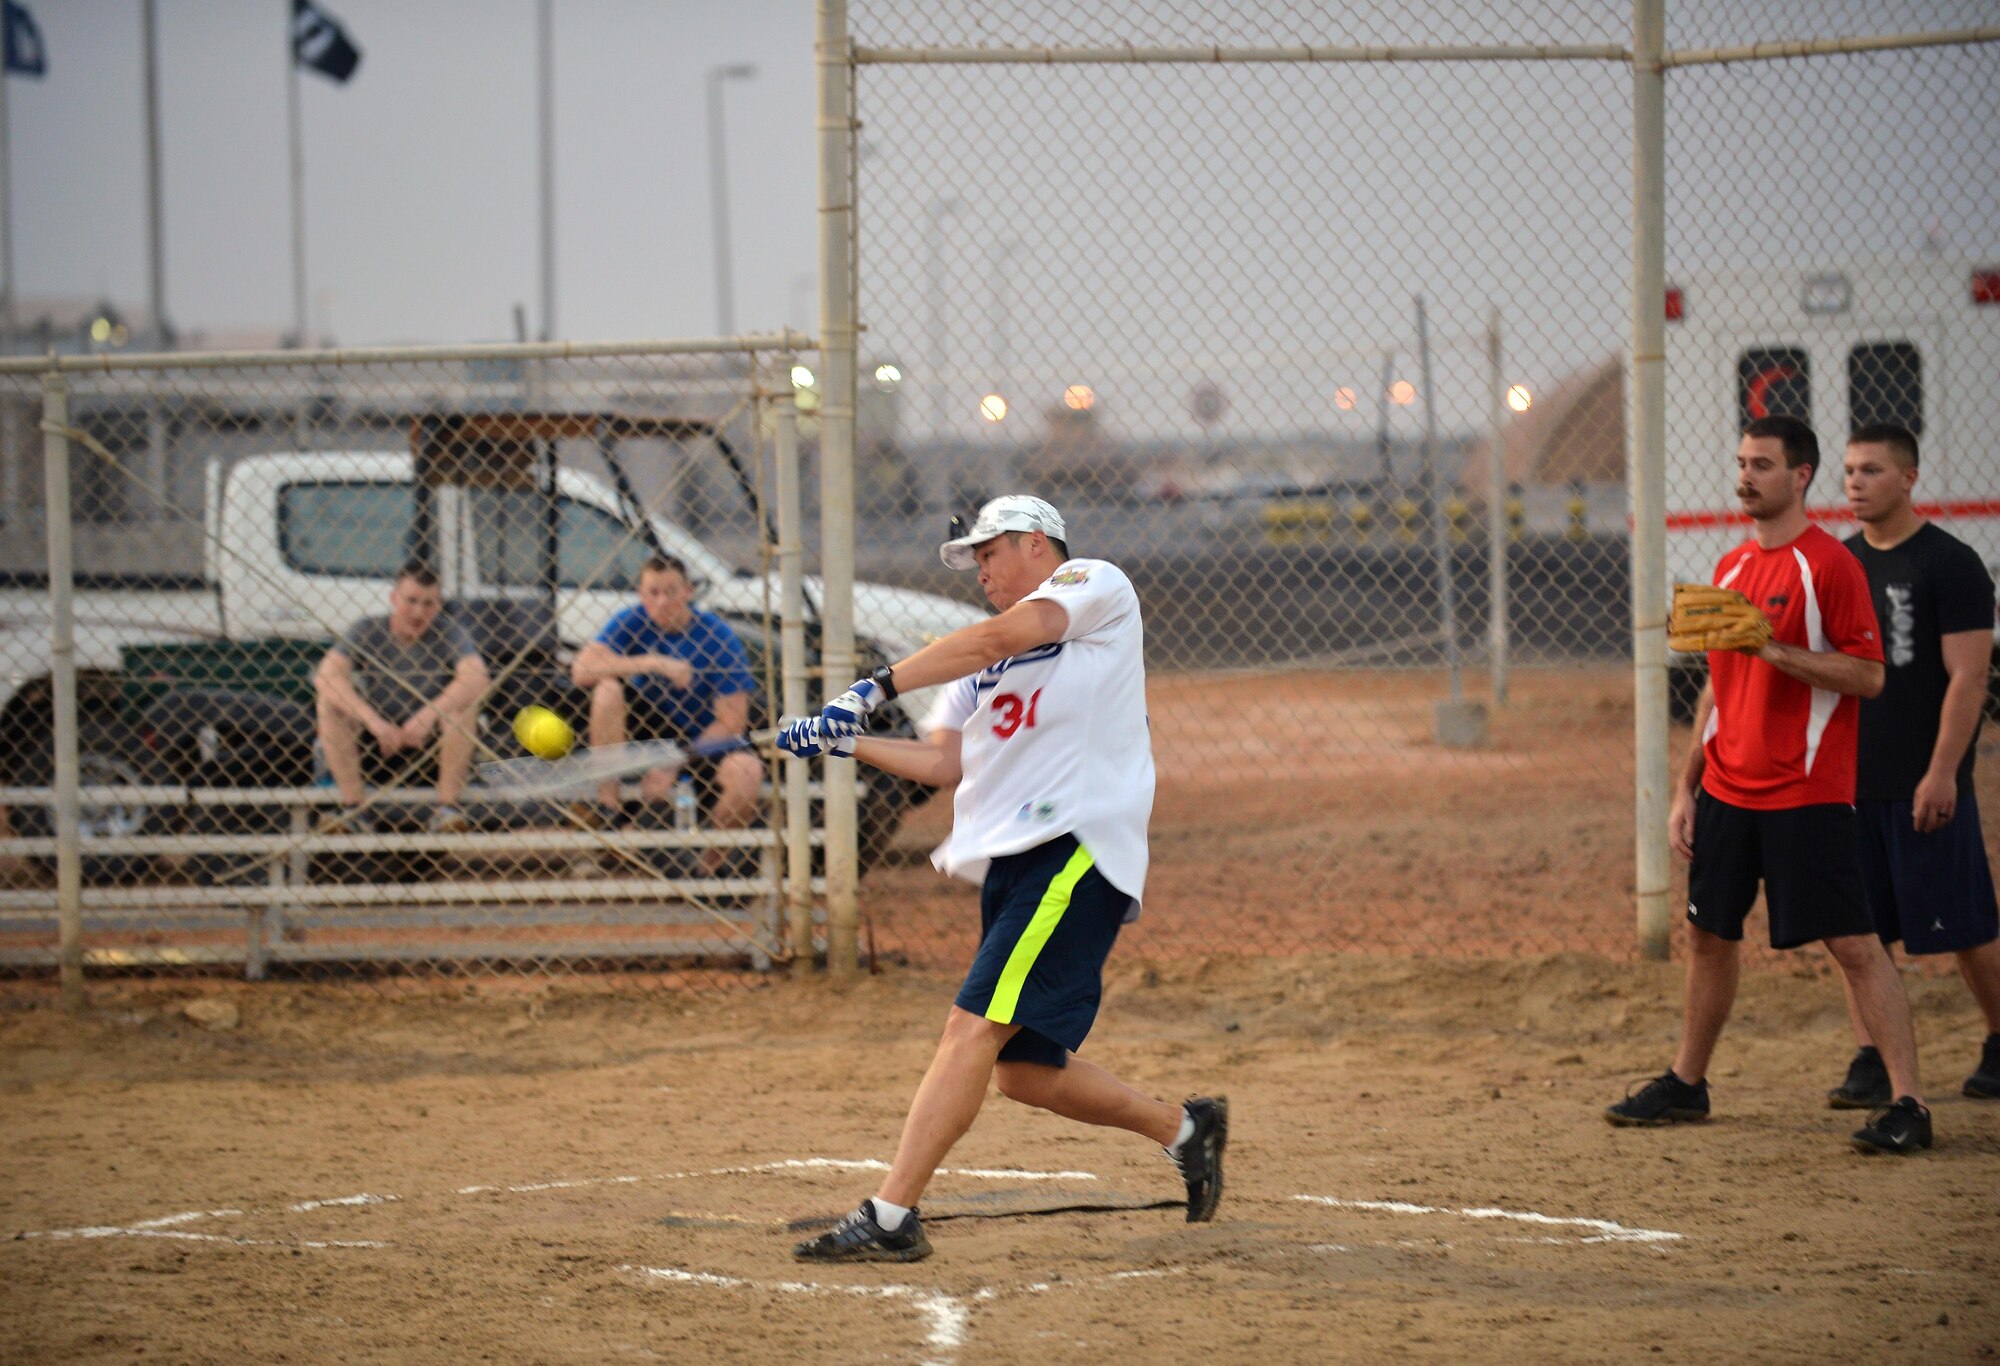 Capt. Jimi, chief of protocol, swings at a softball during a two-day sporting event celebrating the U.S. Army’s 240th birthday at an undisclosed location in Southwest Asia June 13, 2015. The two-day festivities saw U.S. Soldiers and Airmen as well as other coalition forces participate in a 5K color run, volleyball, softball, tug-o-war and dodgeball. (U.S. Air Force photo/Tech. Sgt. Jeff Andrejcik)